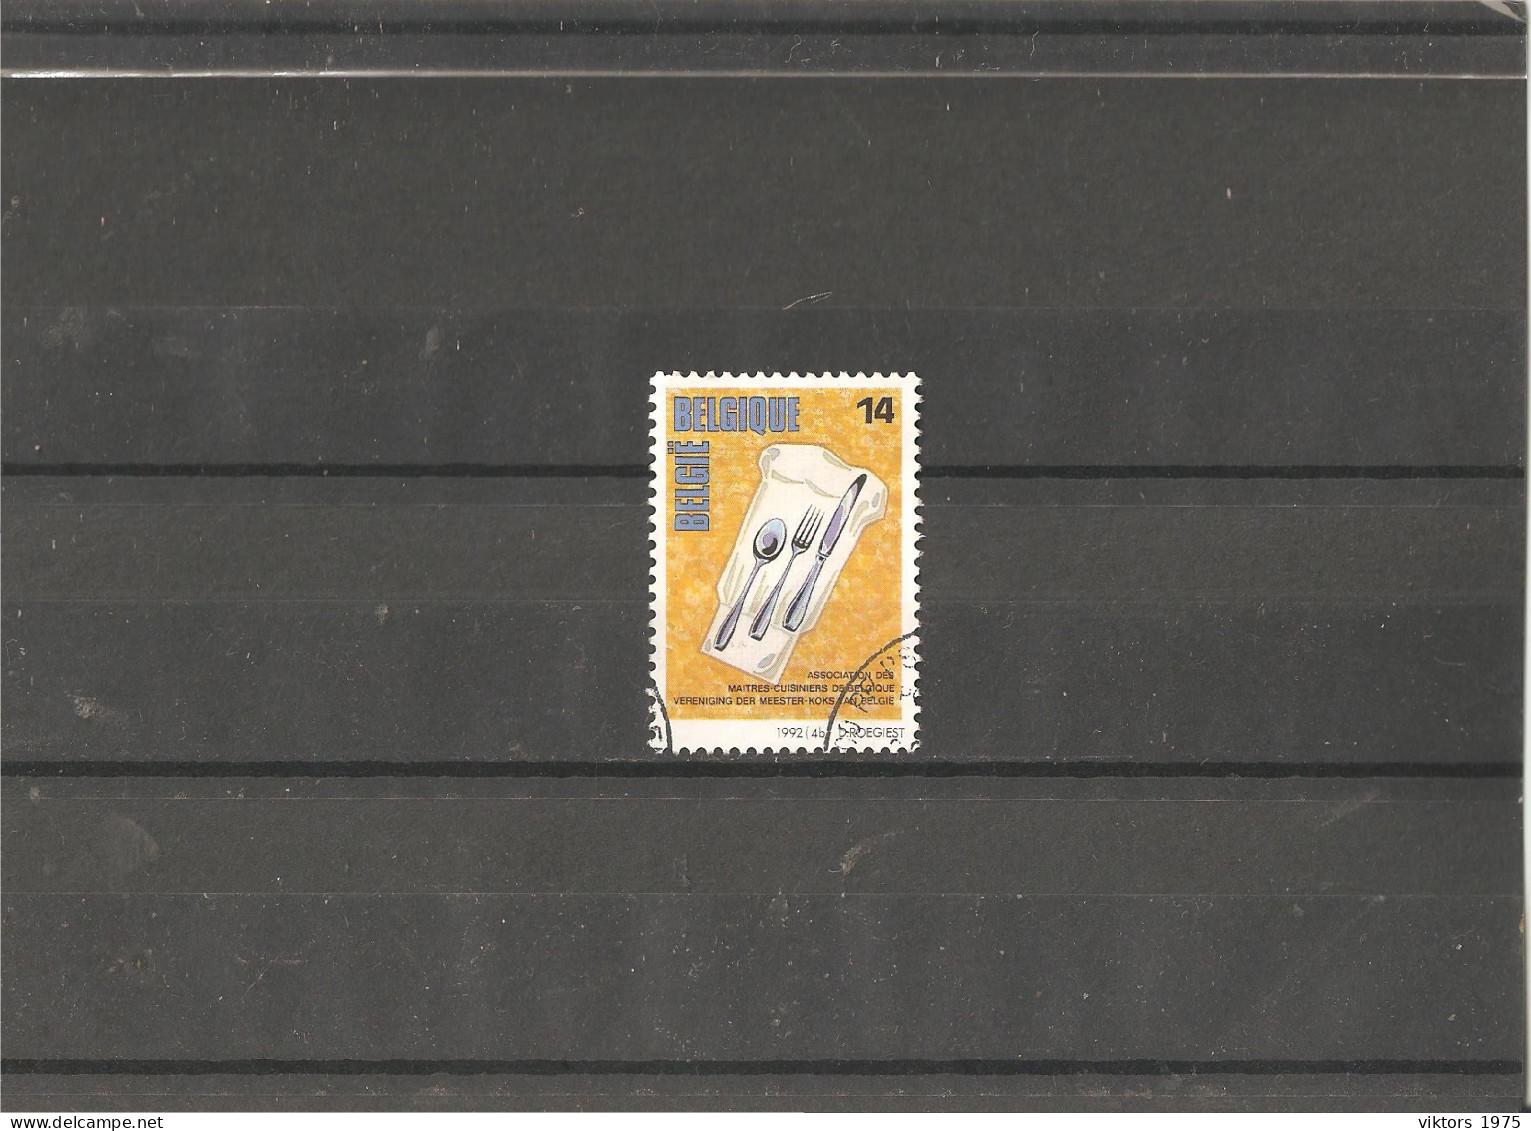 Used Stamp Nr.2498 In MICHEL Catalog - Used Stamps